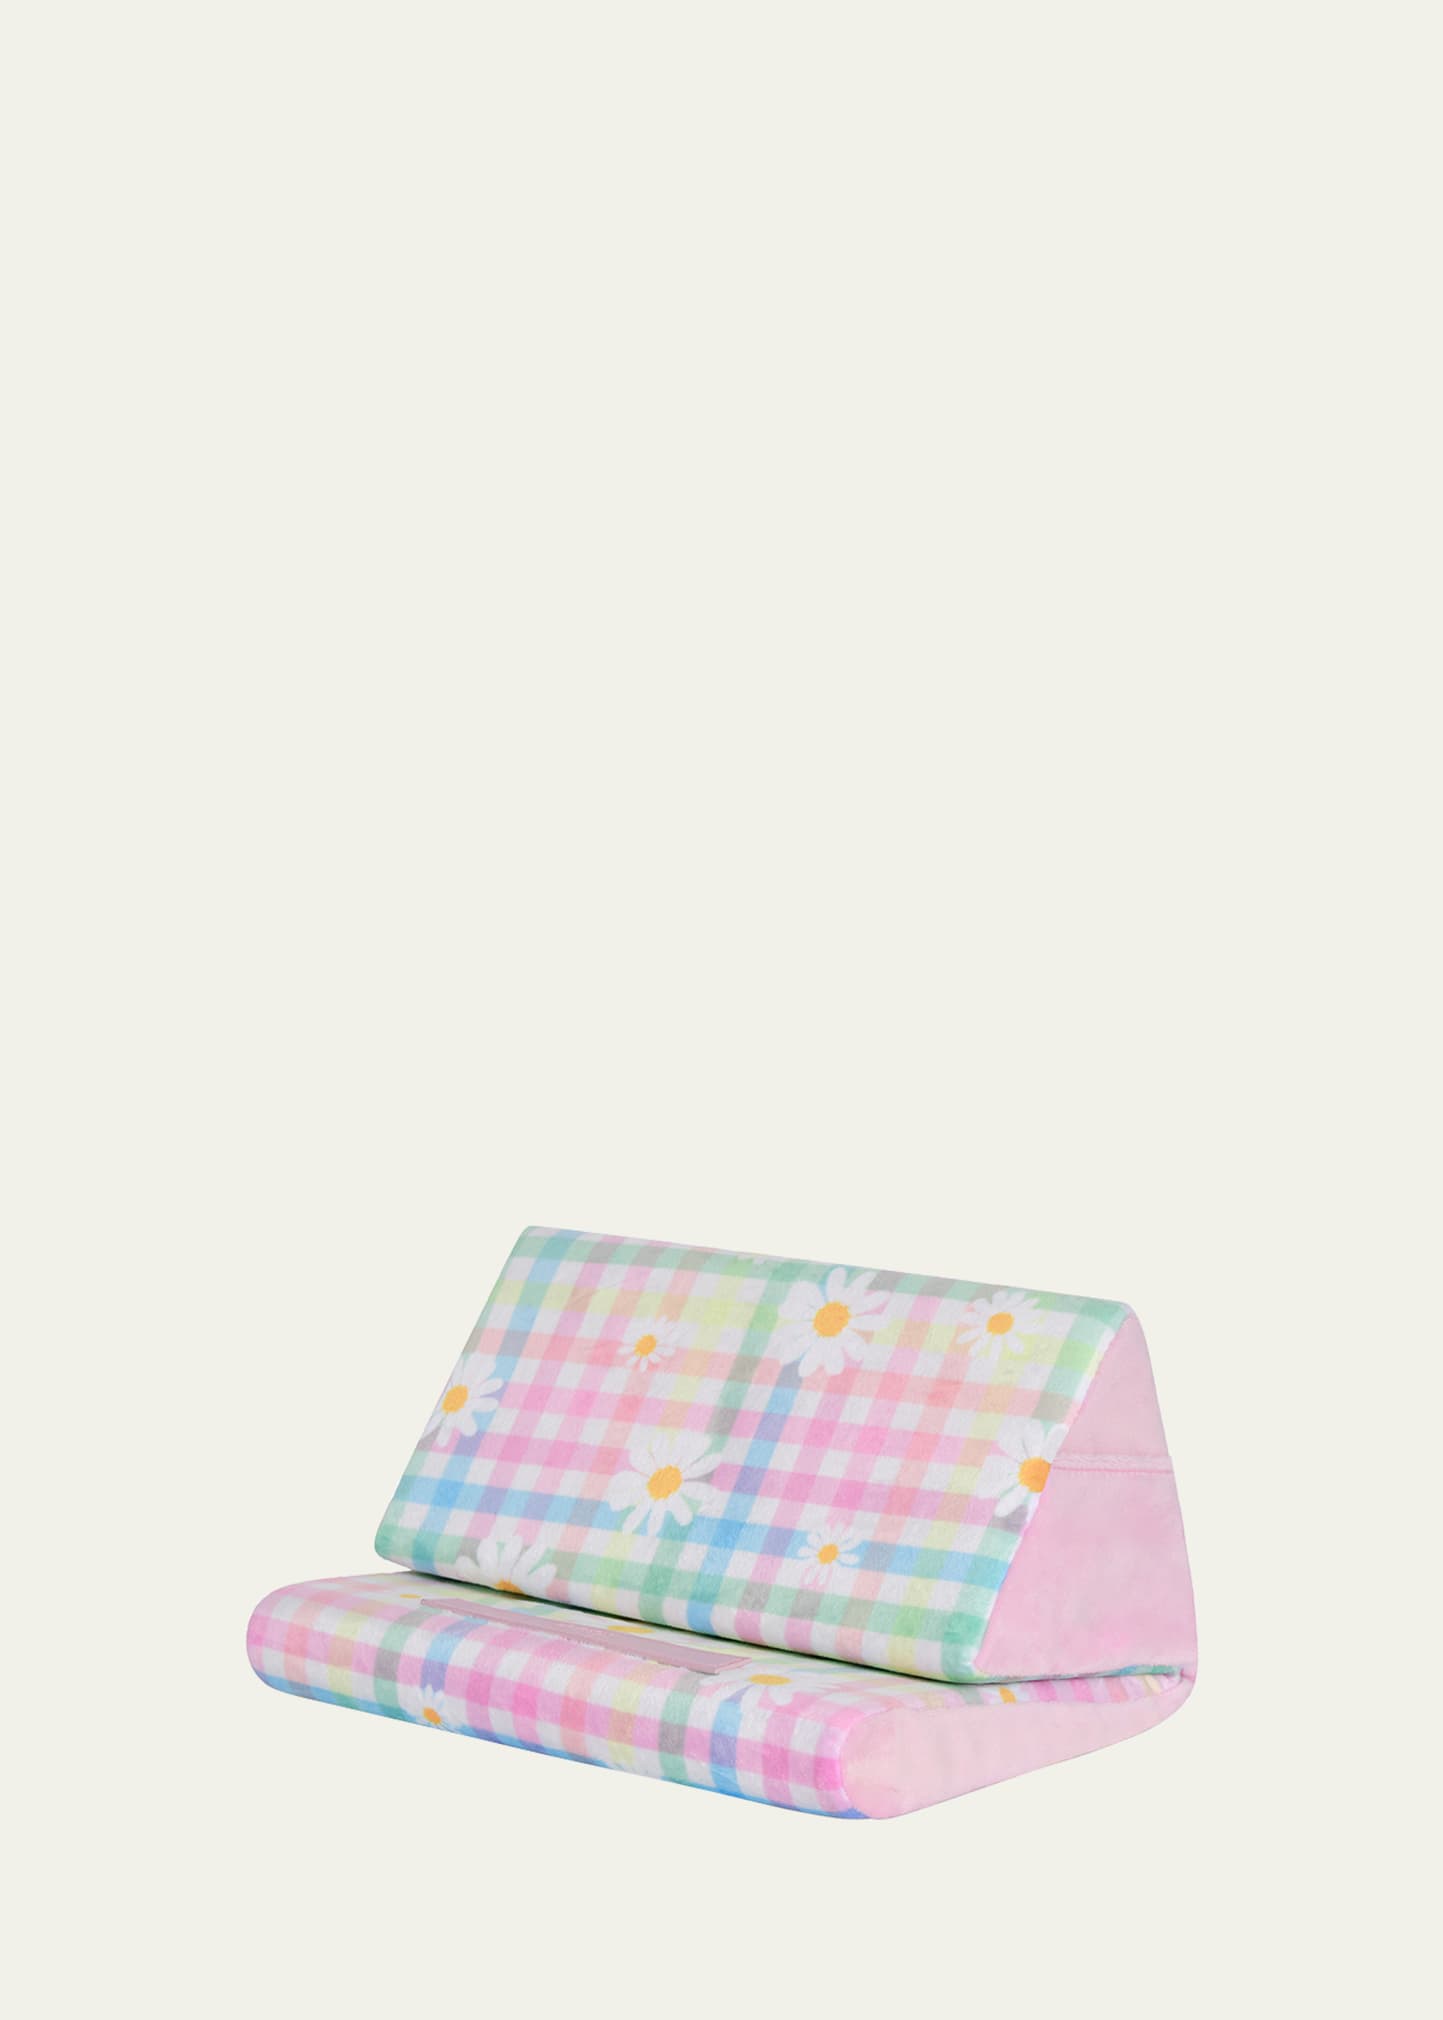 Iscream Girl's Daisy Gingham Tablet Pillow In Pink